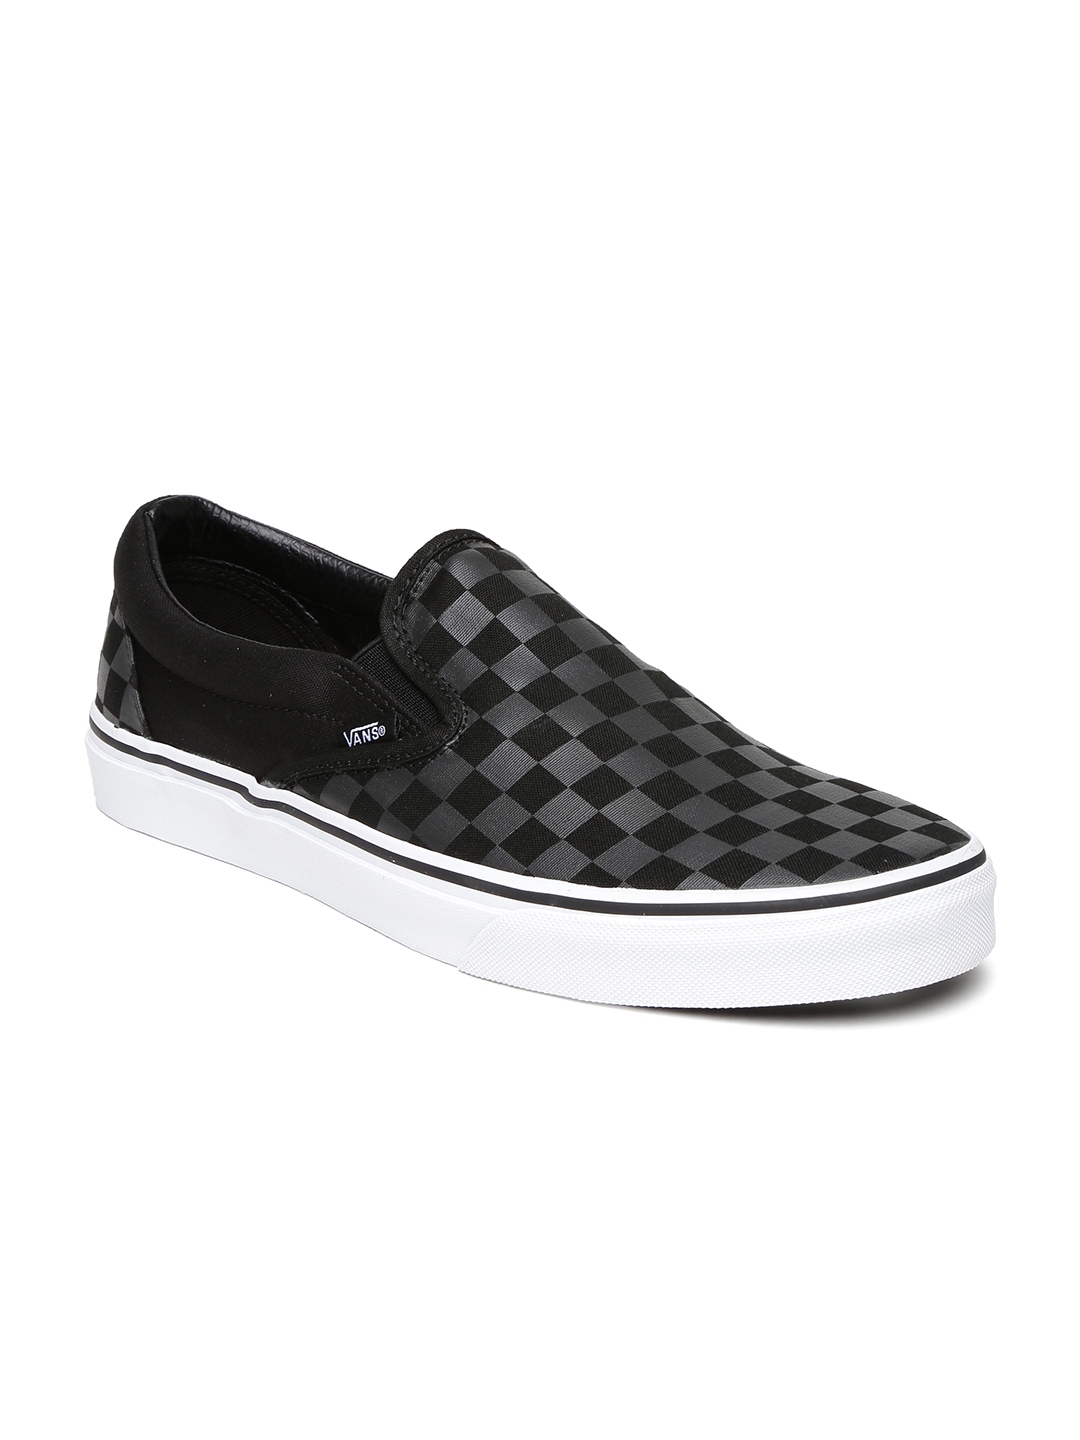 Vans Black & Grey Checked Classic Loafers - Casual Shoes for Unisex 1192529 | Myntra